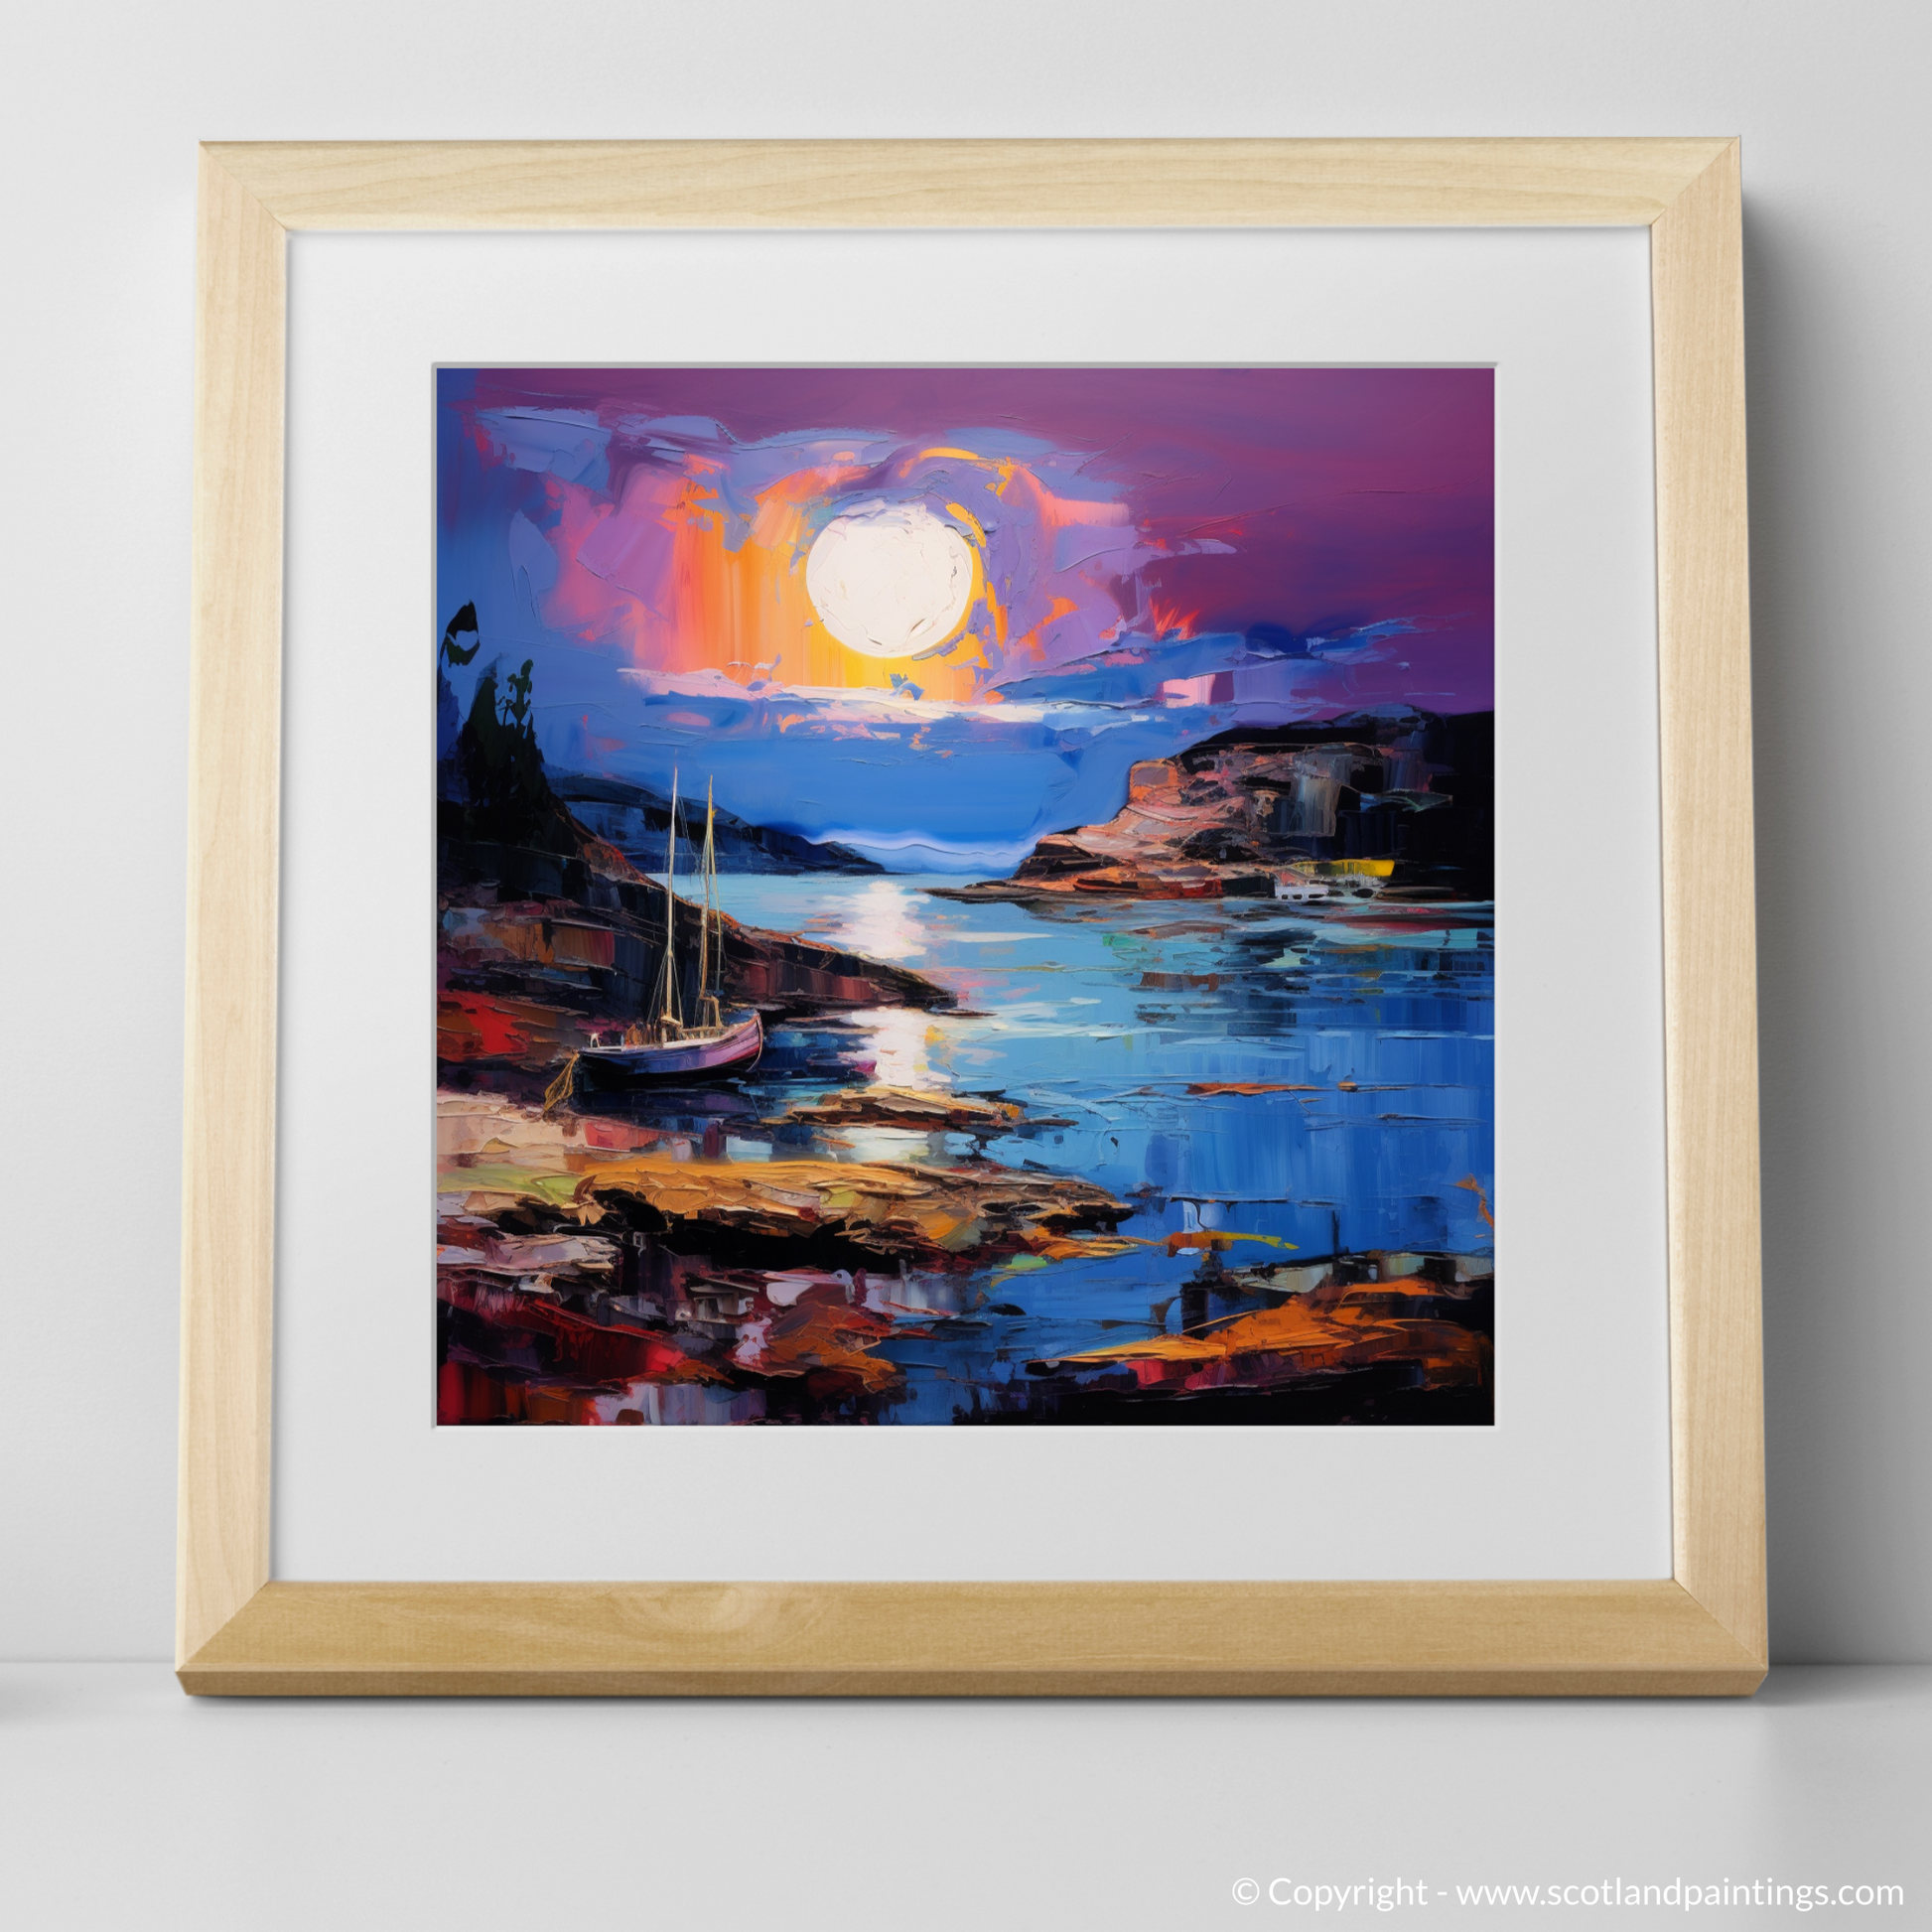 Art Print of Whitehills Harbour at dusk with a natural frame